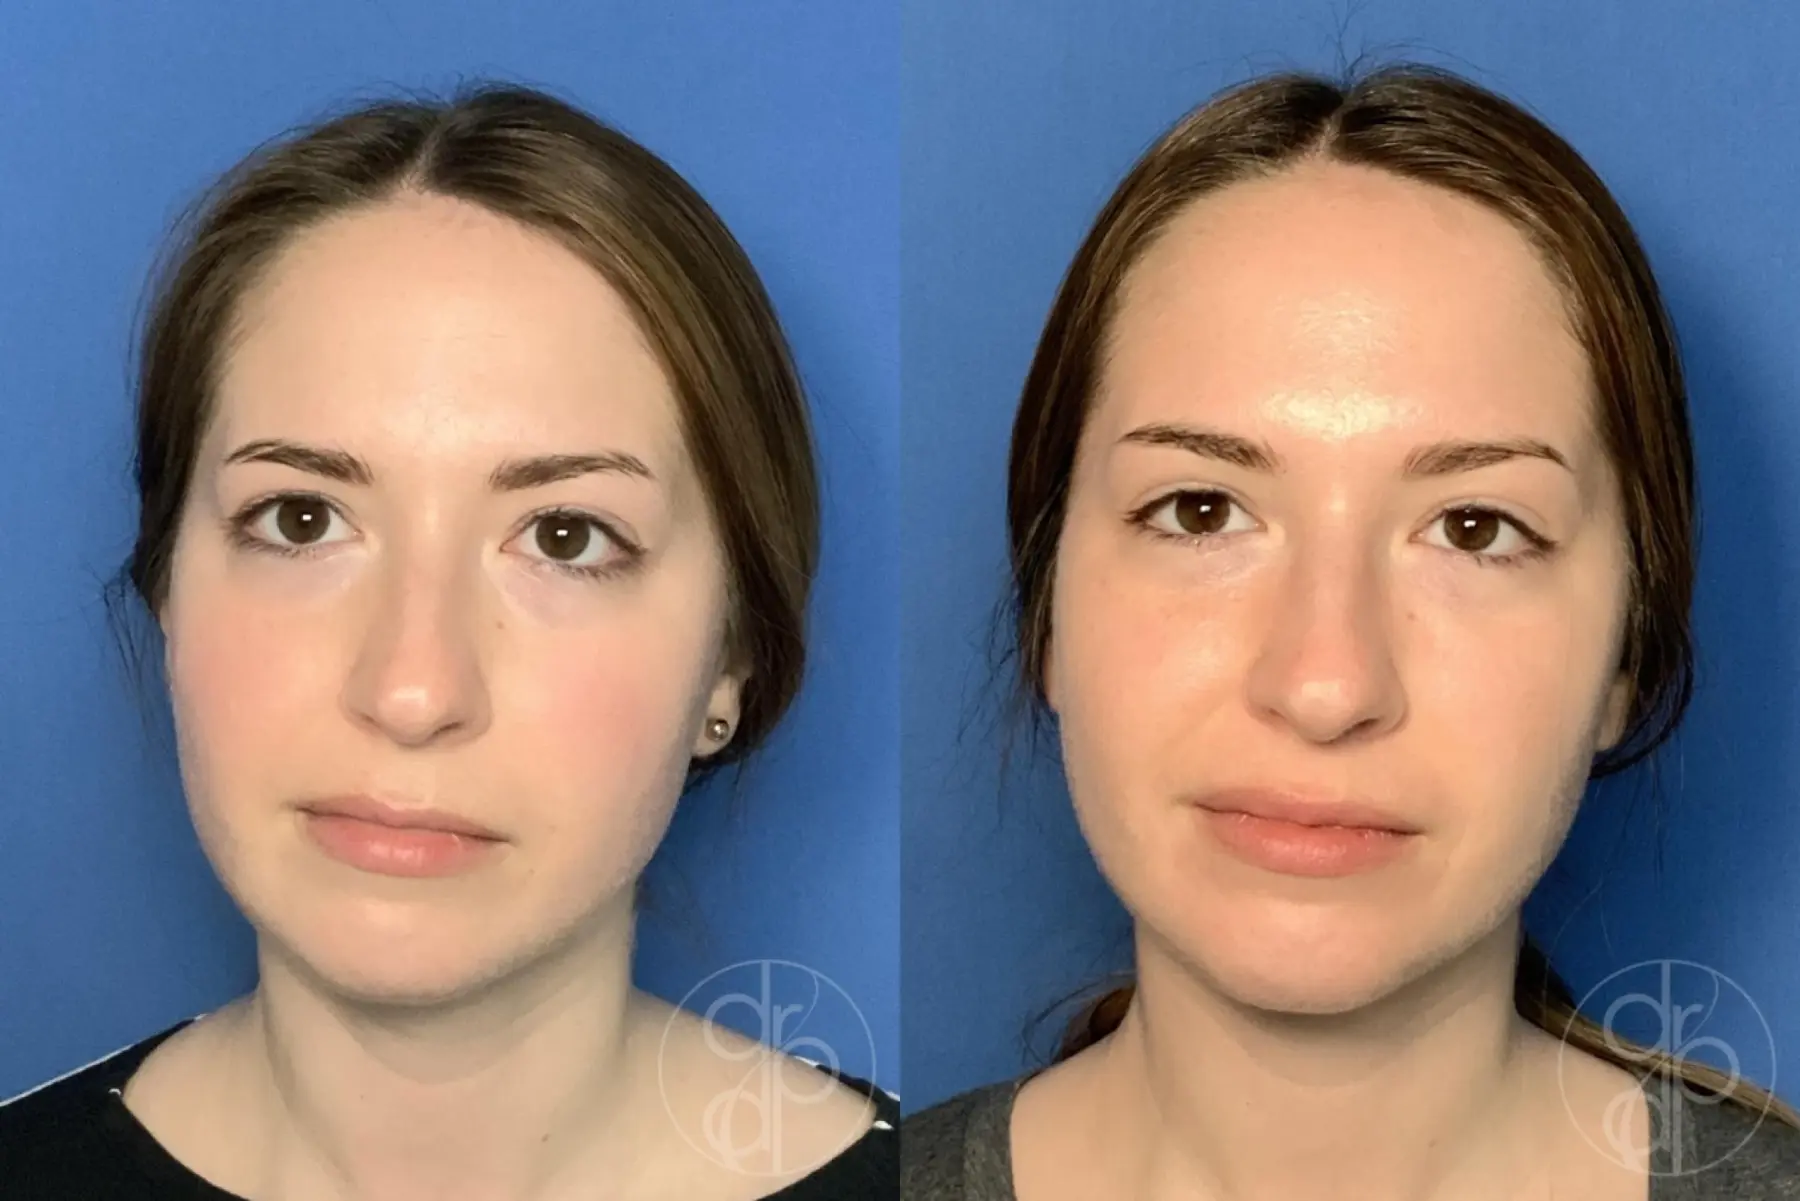 patient 13355 fillers before and after result - Before and After 1